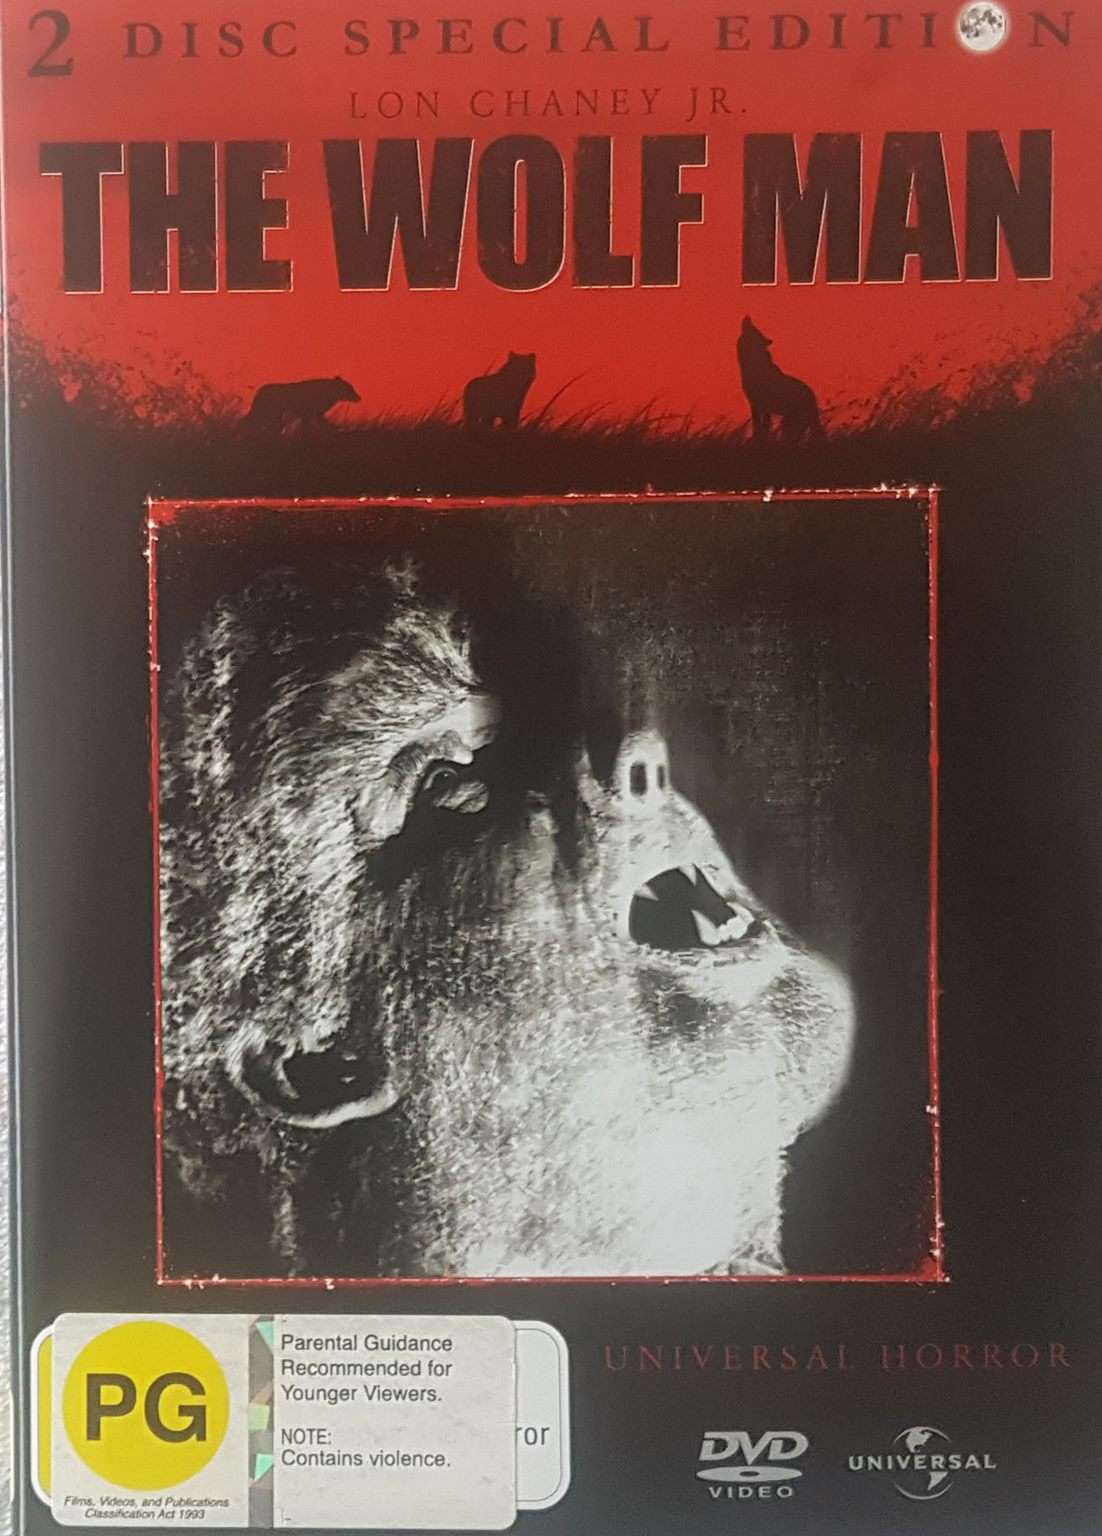 The Wolf Man 2 Disc Special Edition w/ booklet